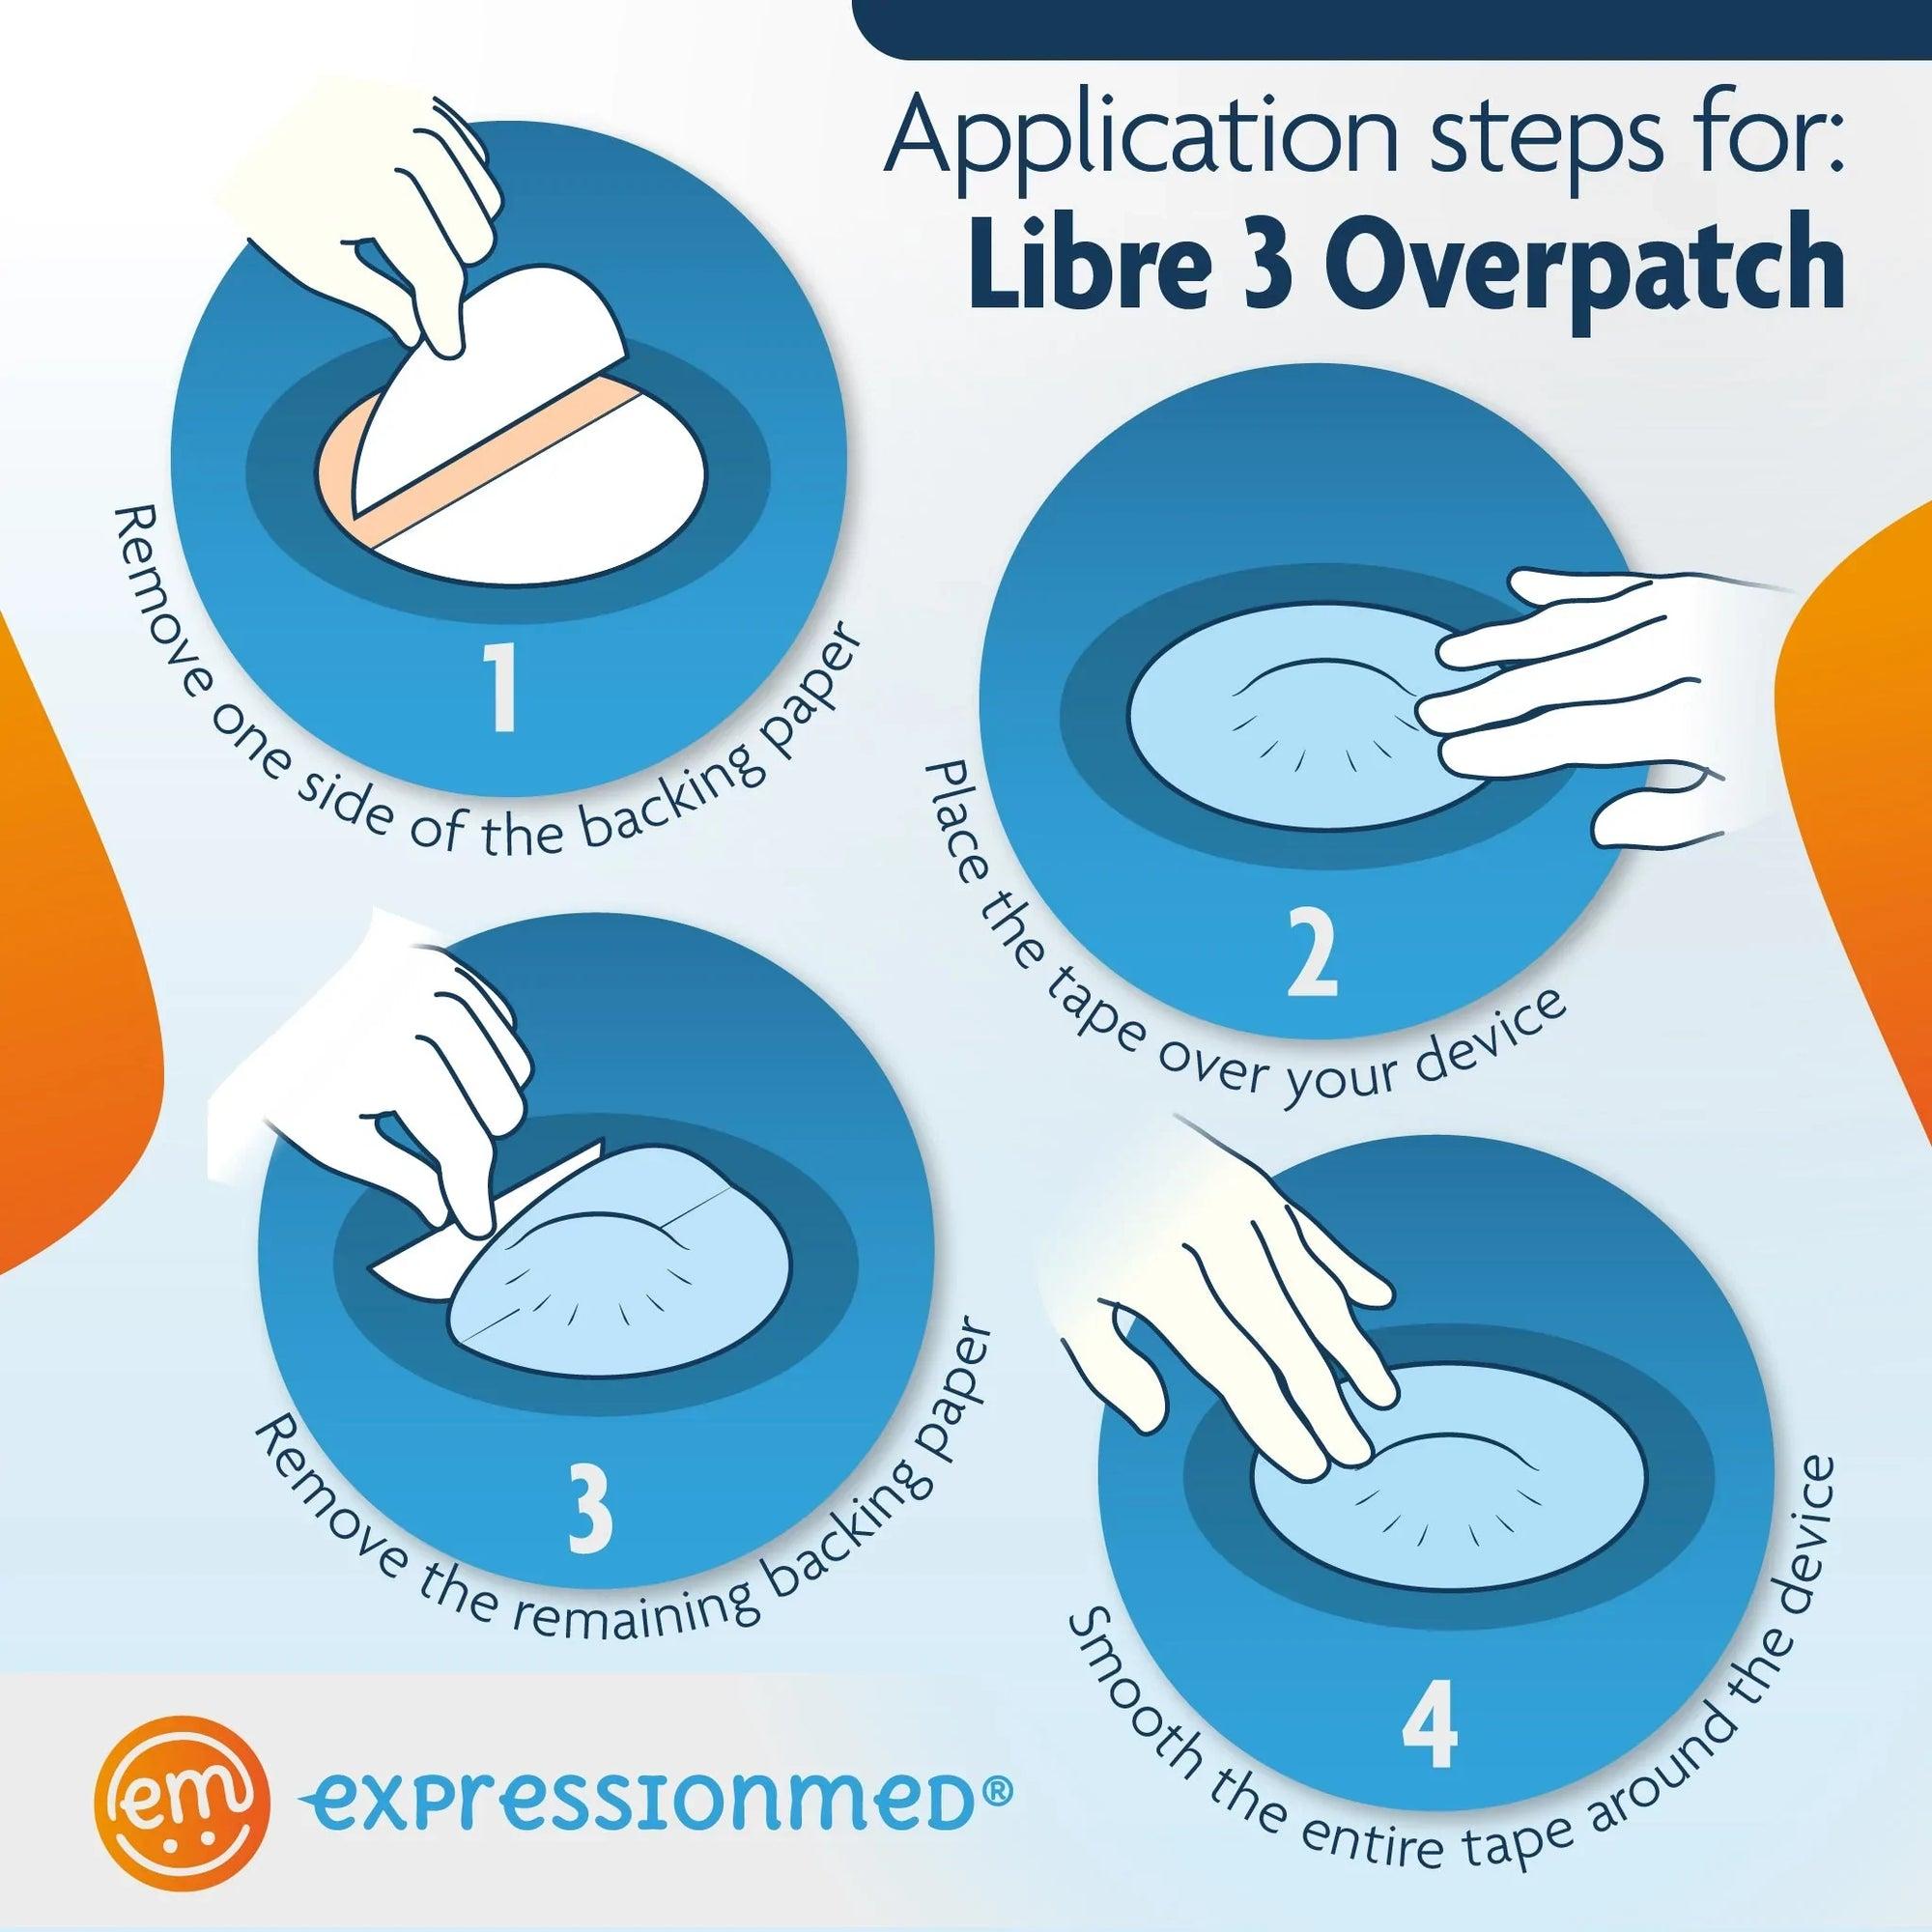 ExpressionMed Libre 3 Overpatch Application Instructions and Dimensions